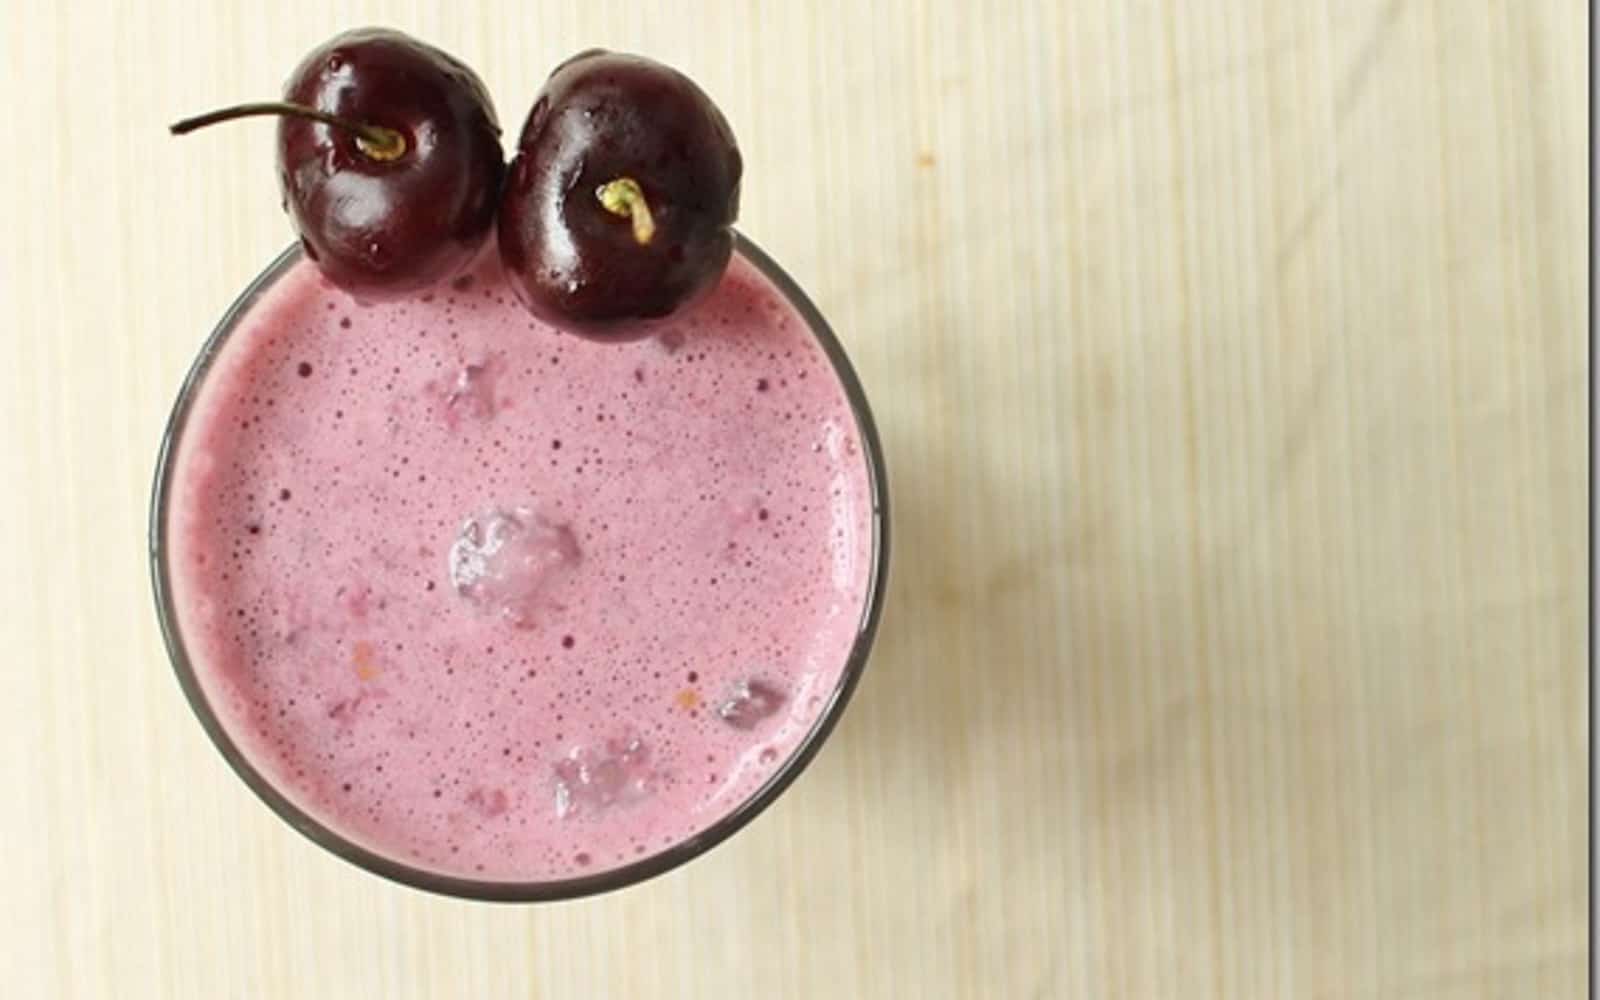 Cherry vanilla almond smoothie garnished with two cherries in a glass.